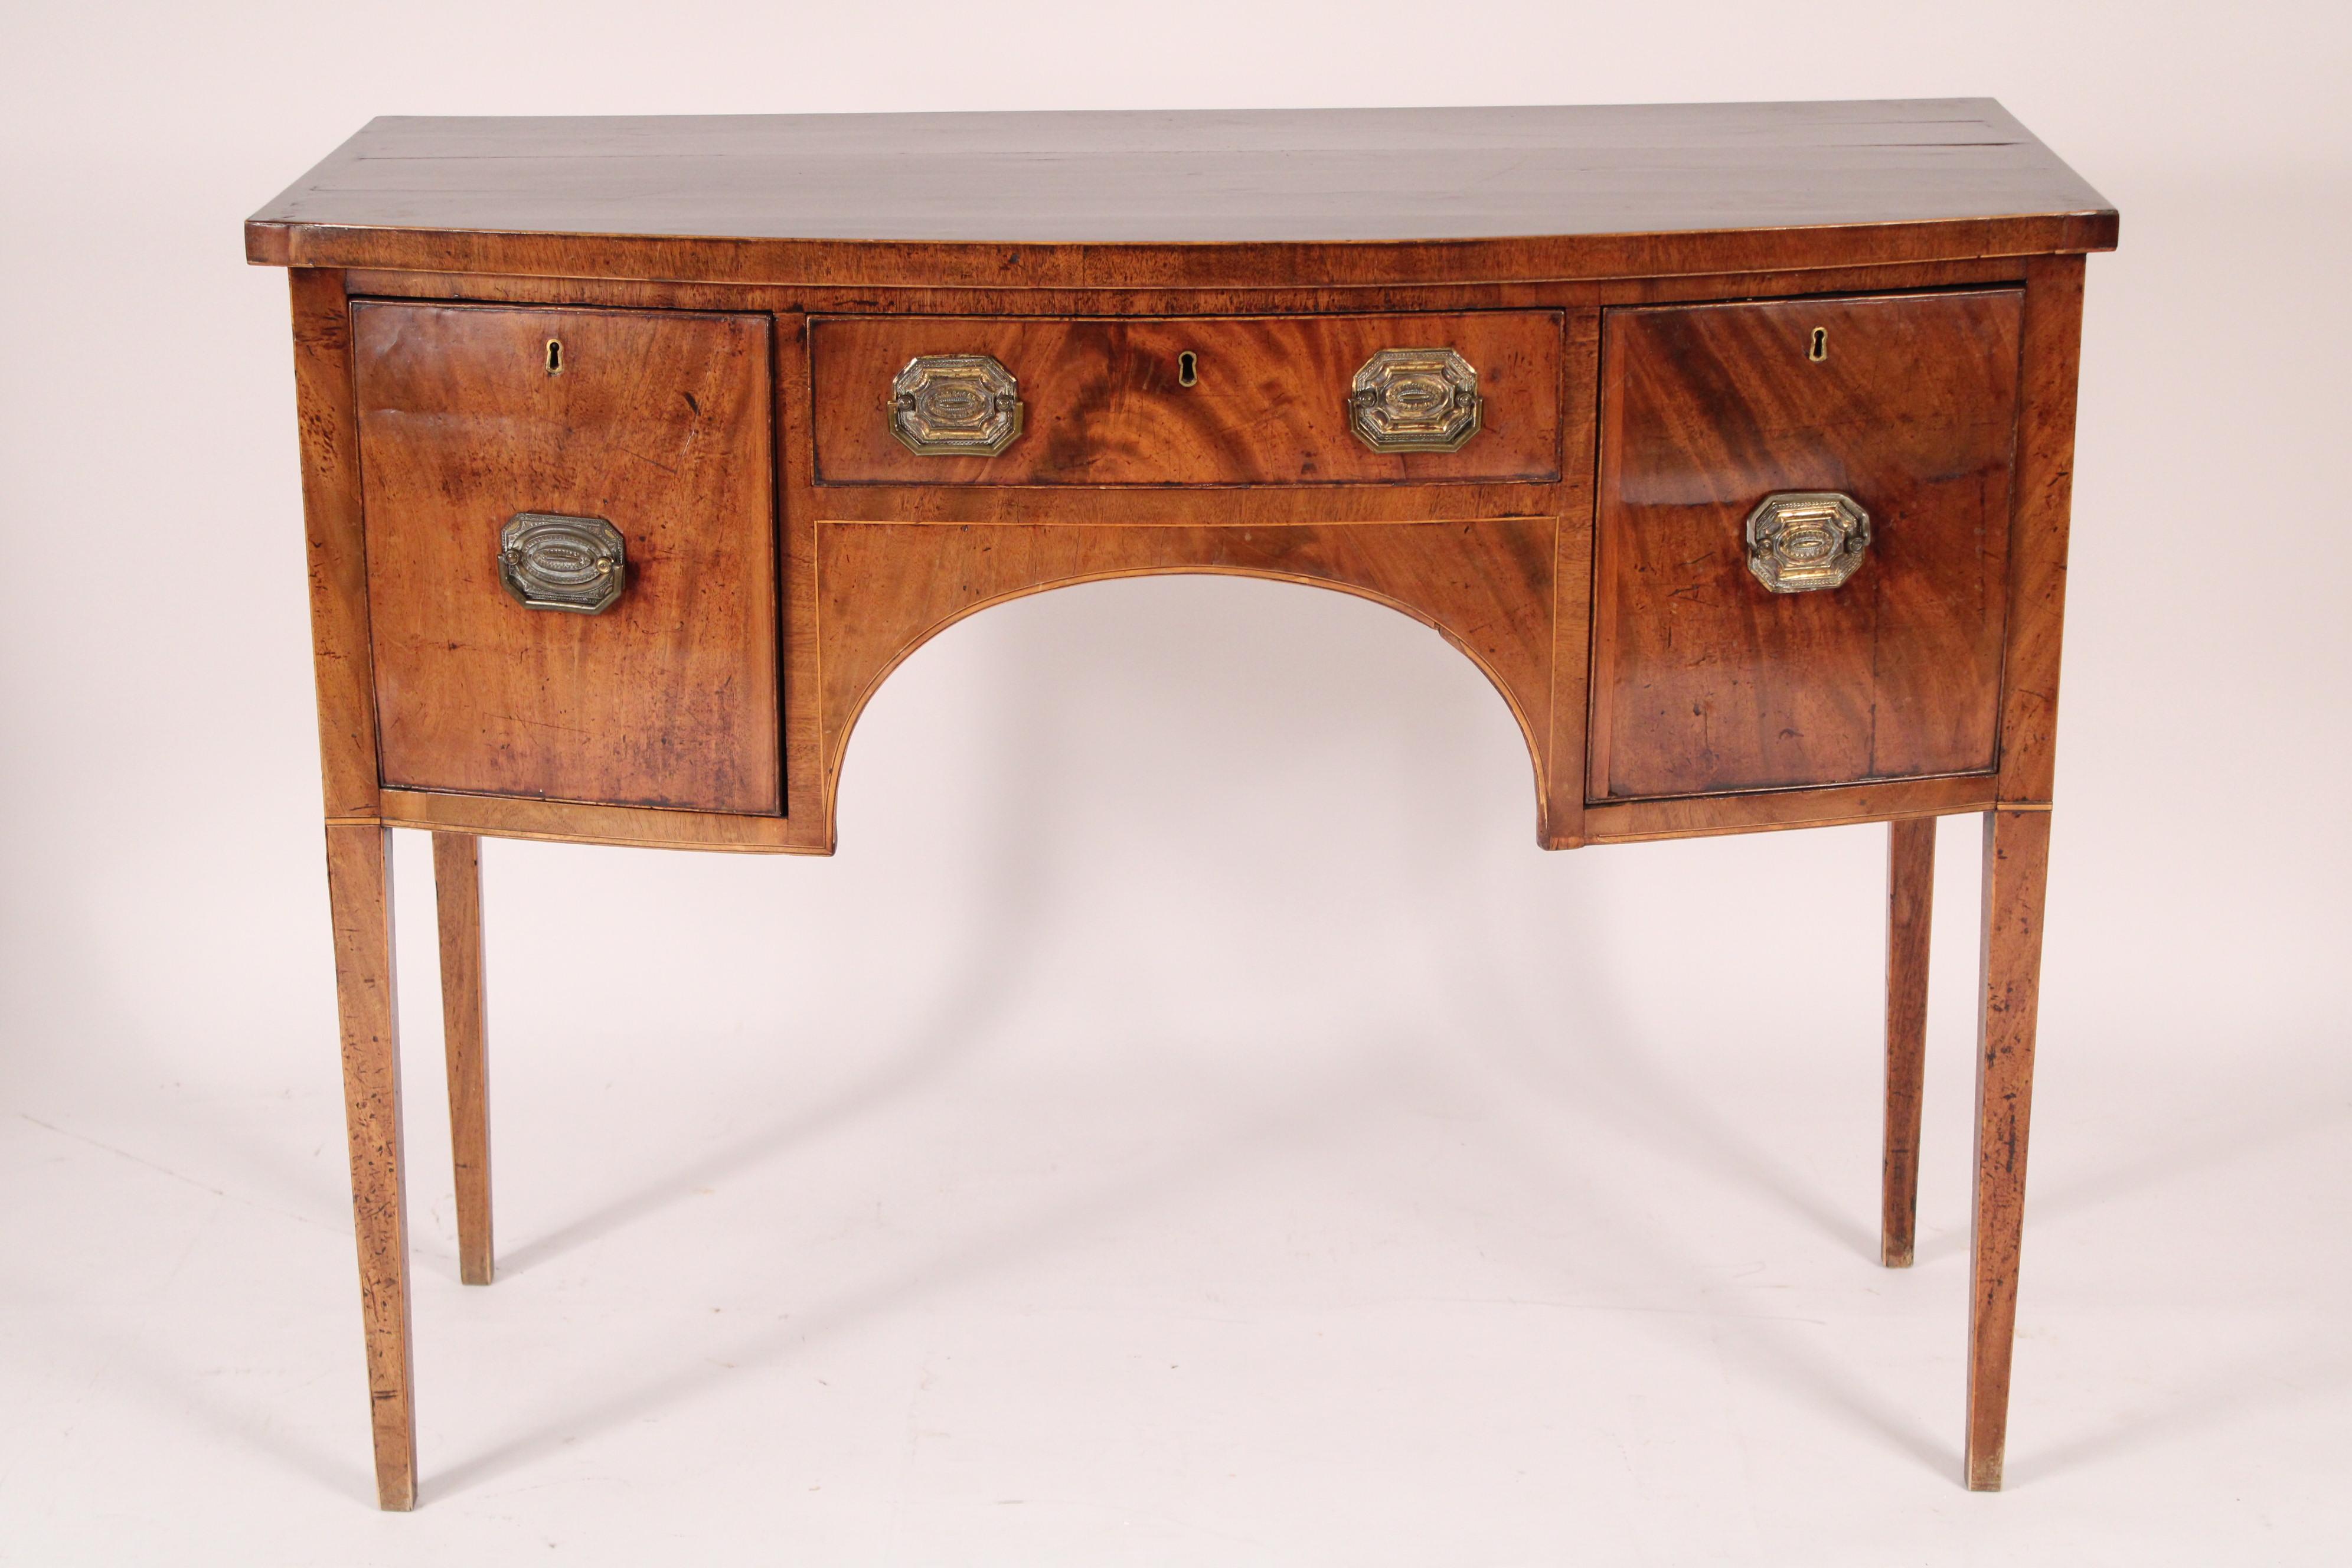 George III mahogany bow front sideboard / server, circa 1800. With a D shaped top with string inlay on front and sides edges, the frieze with 3 drawers with brass hardware, resting on square tapered legs. Nicely figured mahogany and hand dovetailed